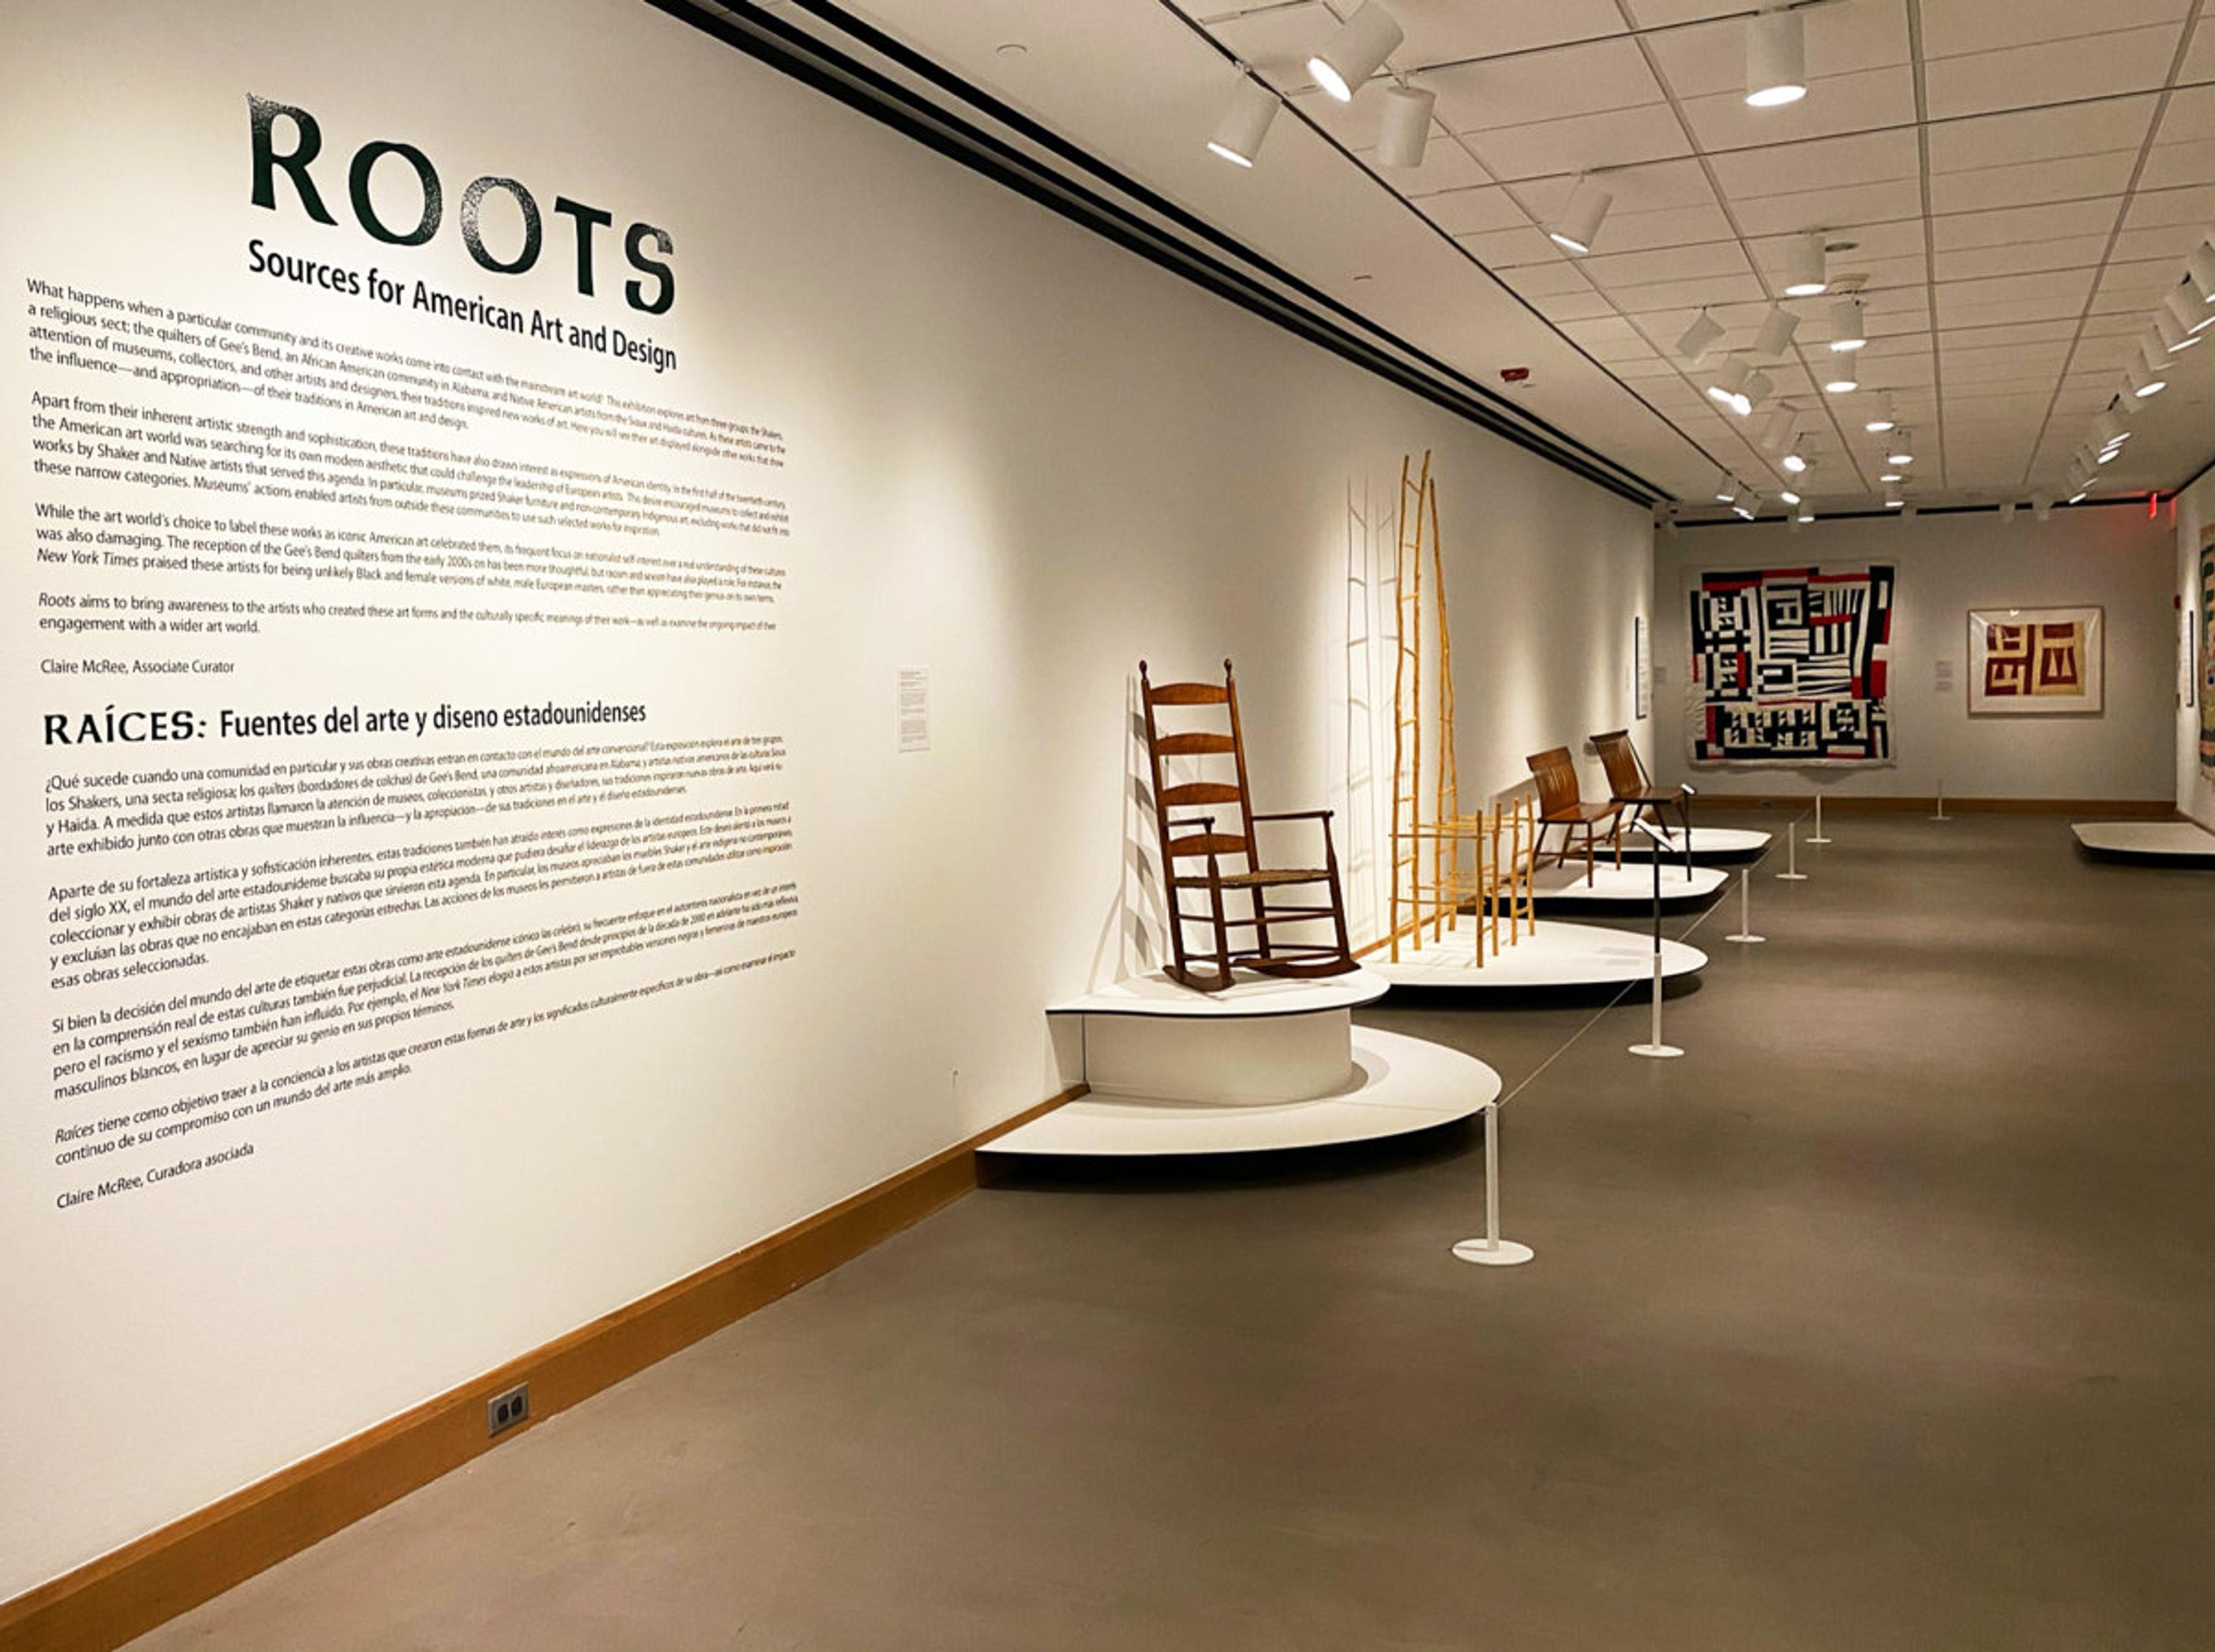 Roots install at Allentown Art Museum